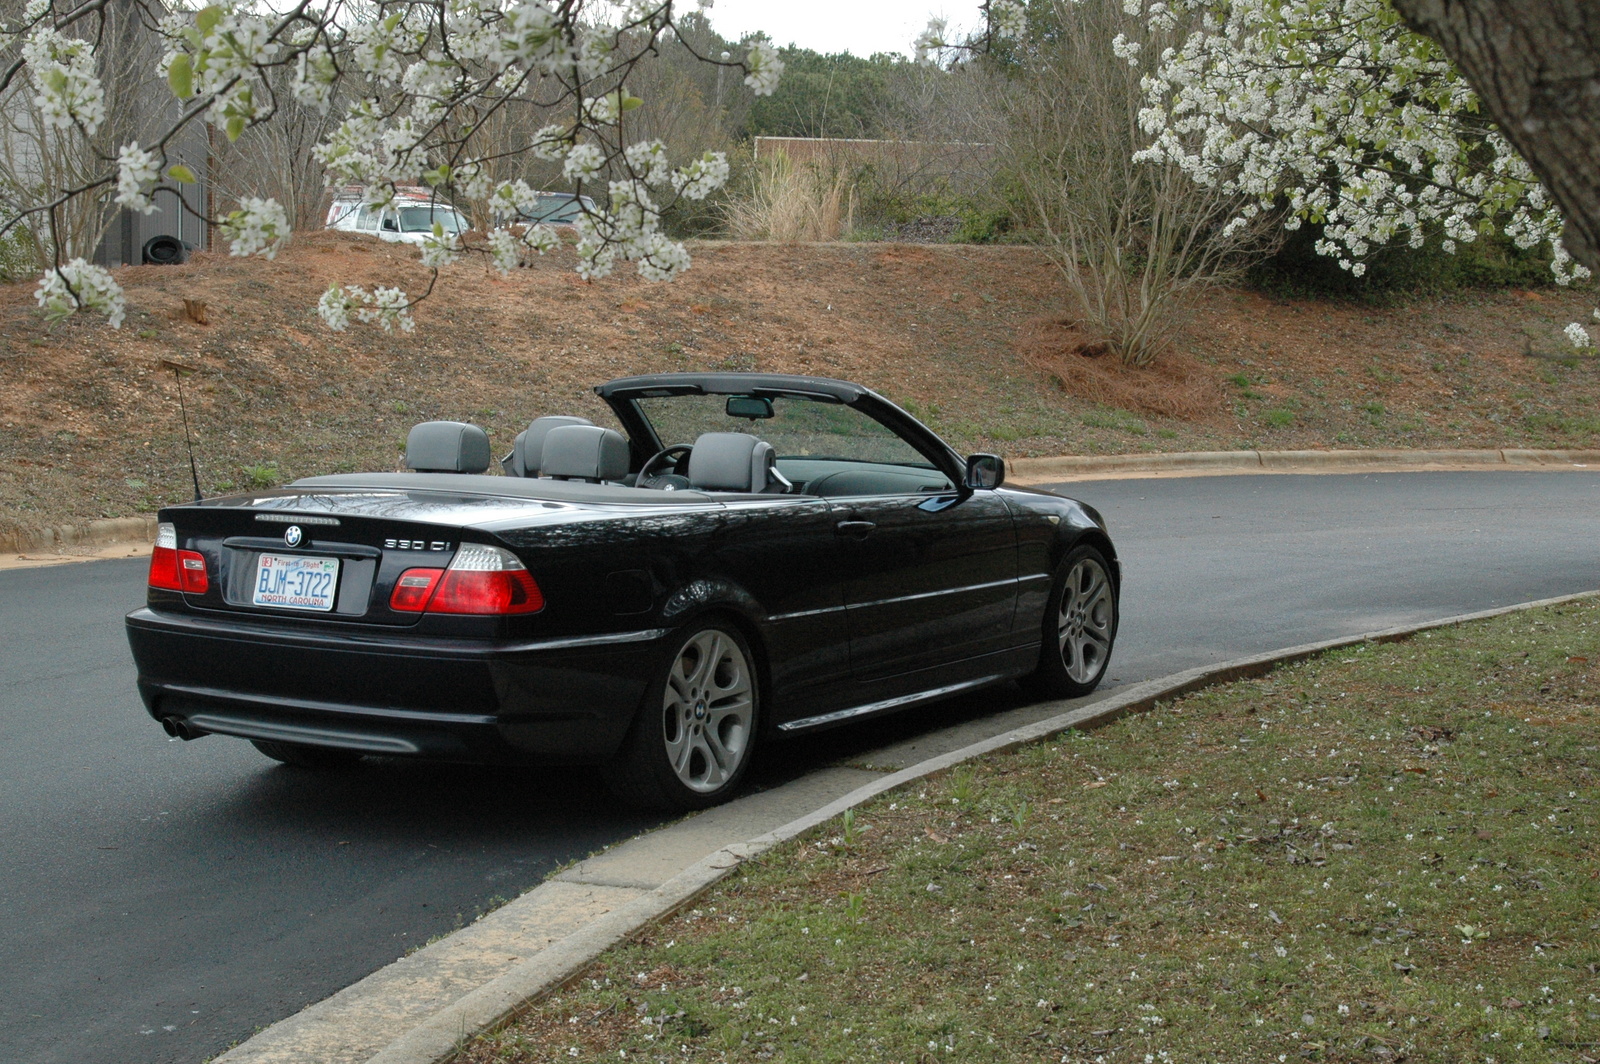 2006 Bmw 330i convertible review #4